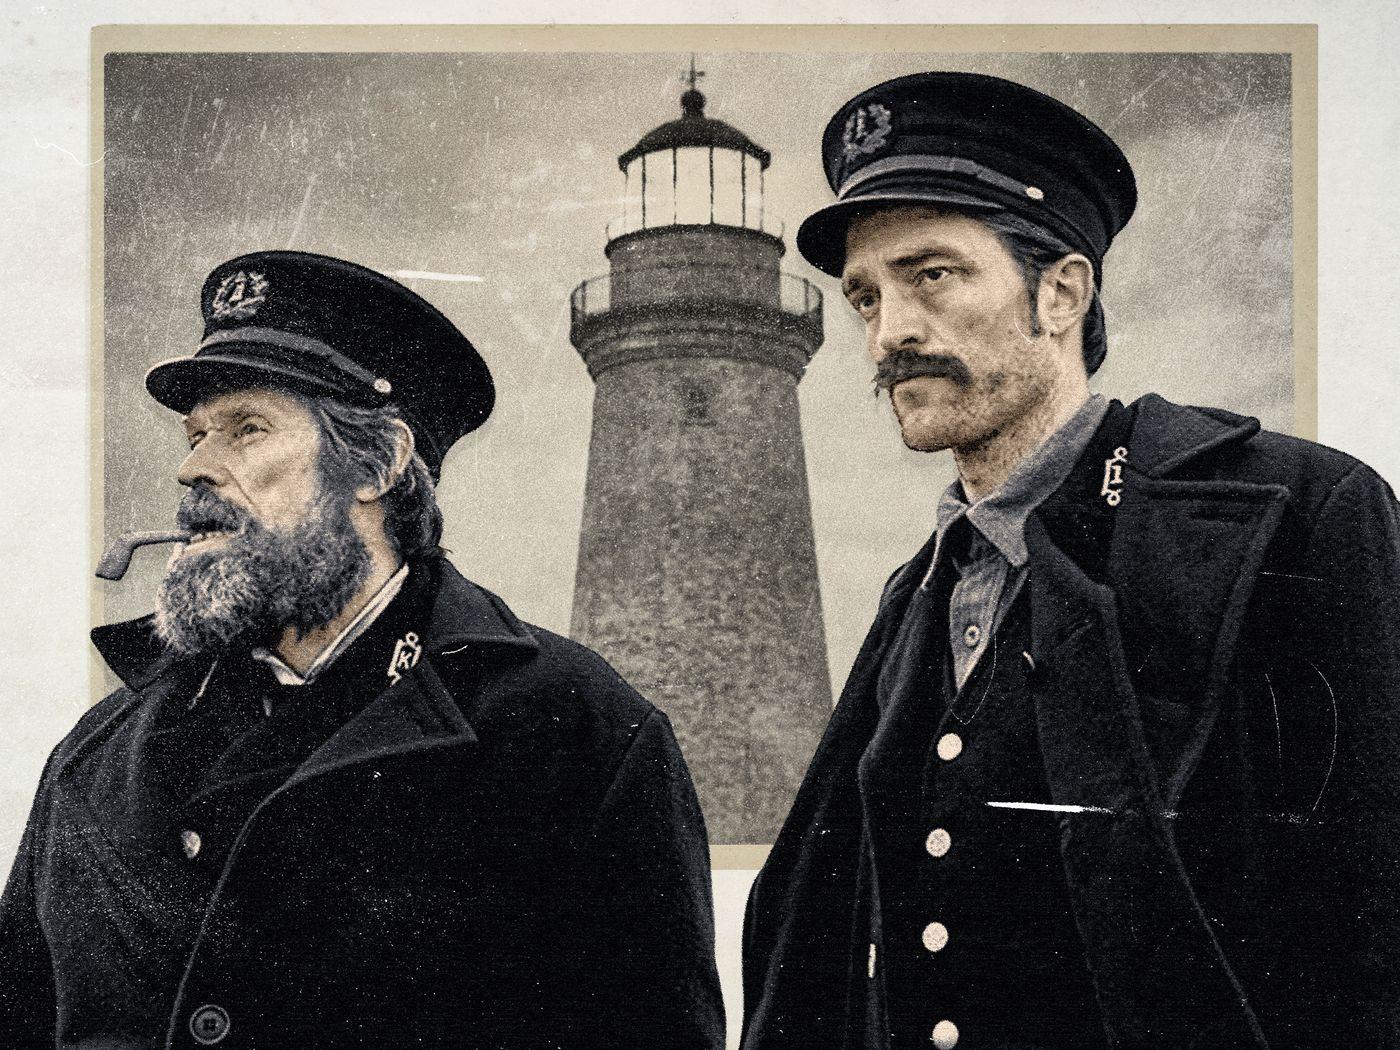 Cannes: 'The Lighthouse' Is a Dark, Flatulent, Wholly